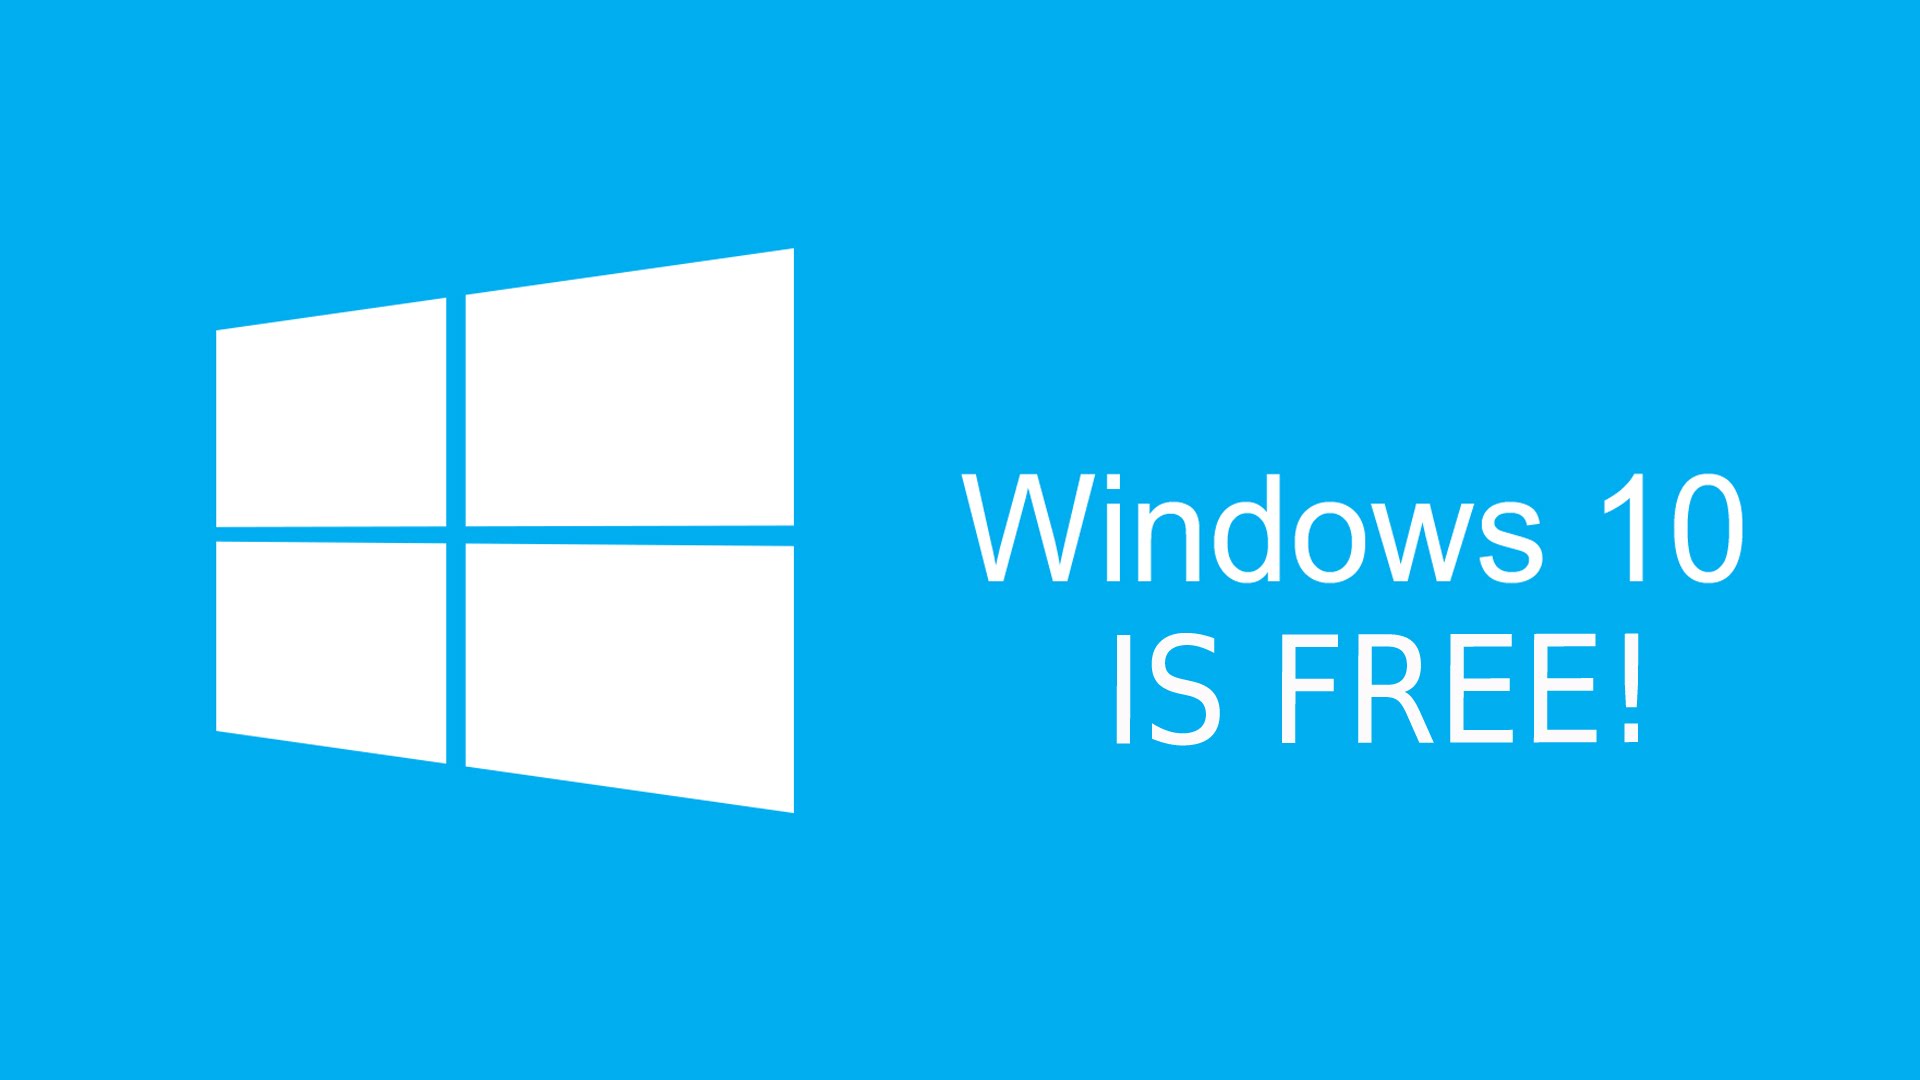 Windows 10 for free